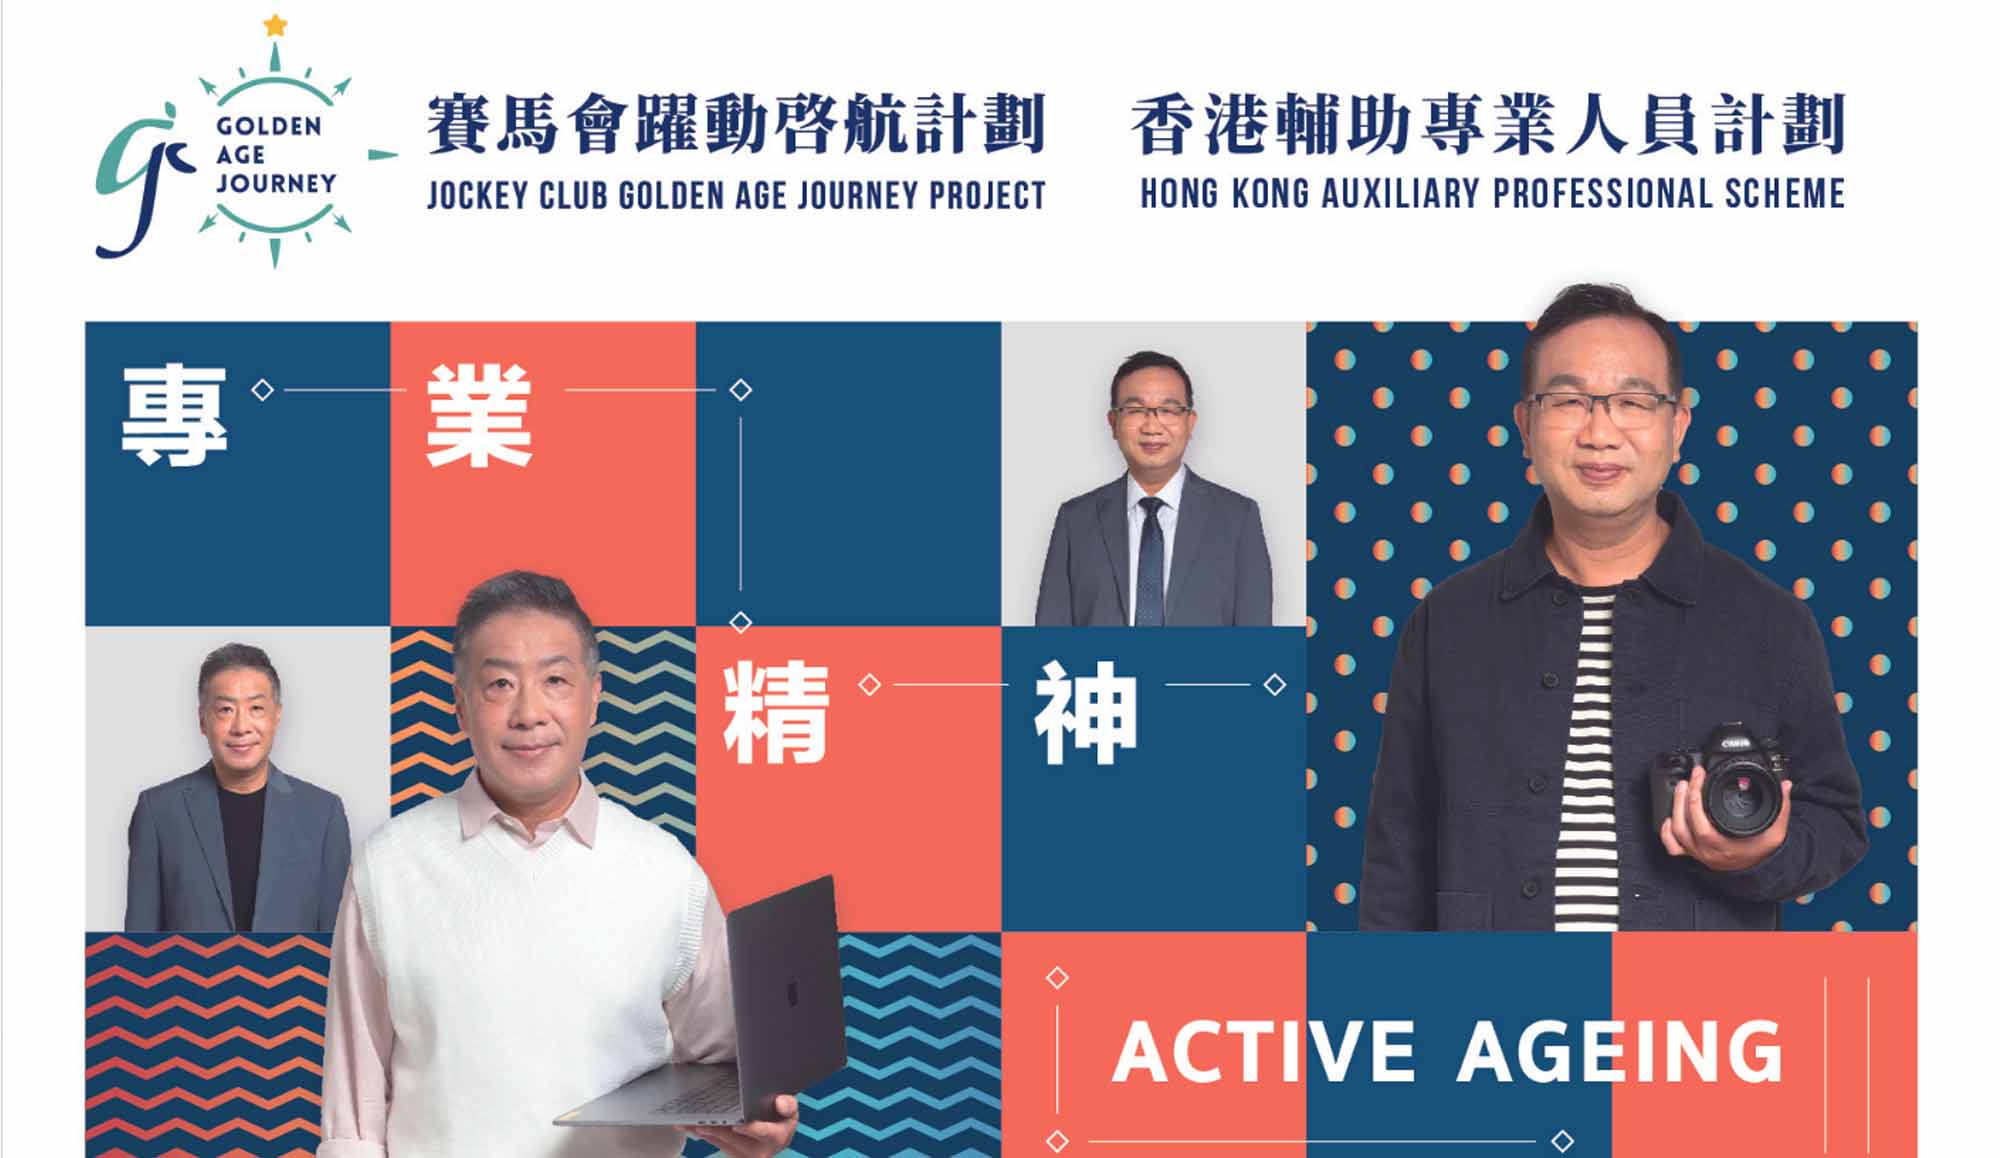 Cover Image - Jockey Club Golden Age Journey Project - Hong Kong Auxiliary Professional Scheme 